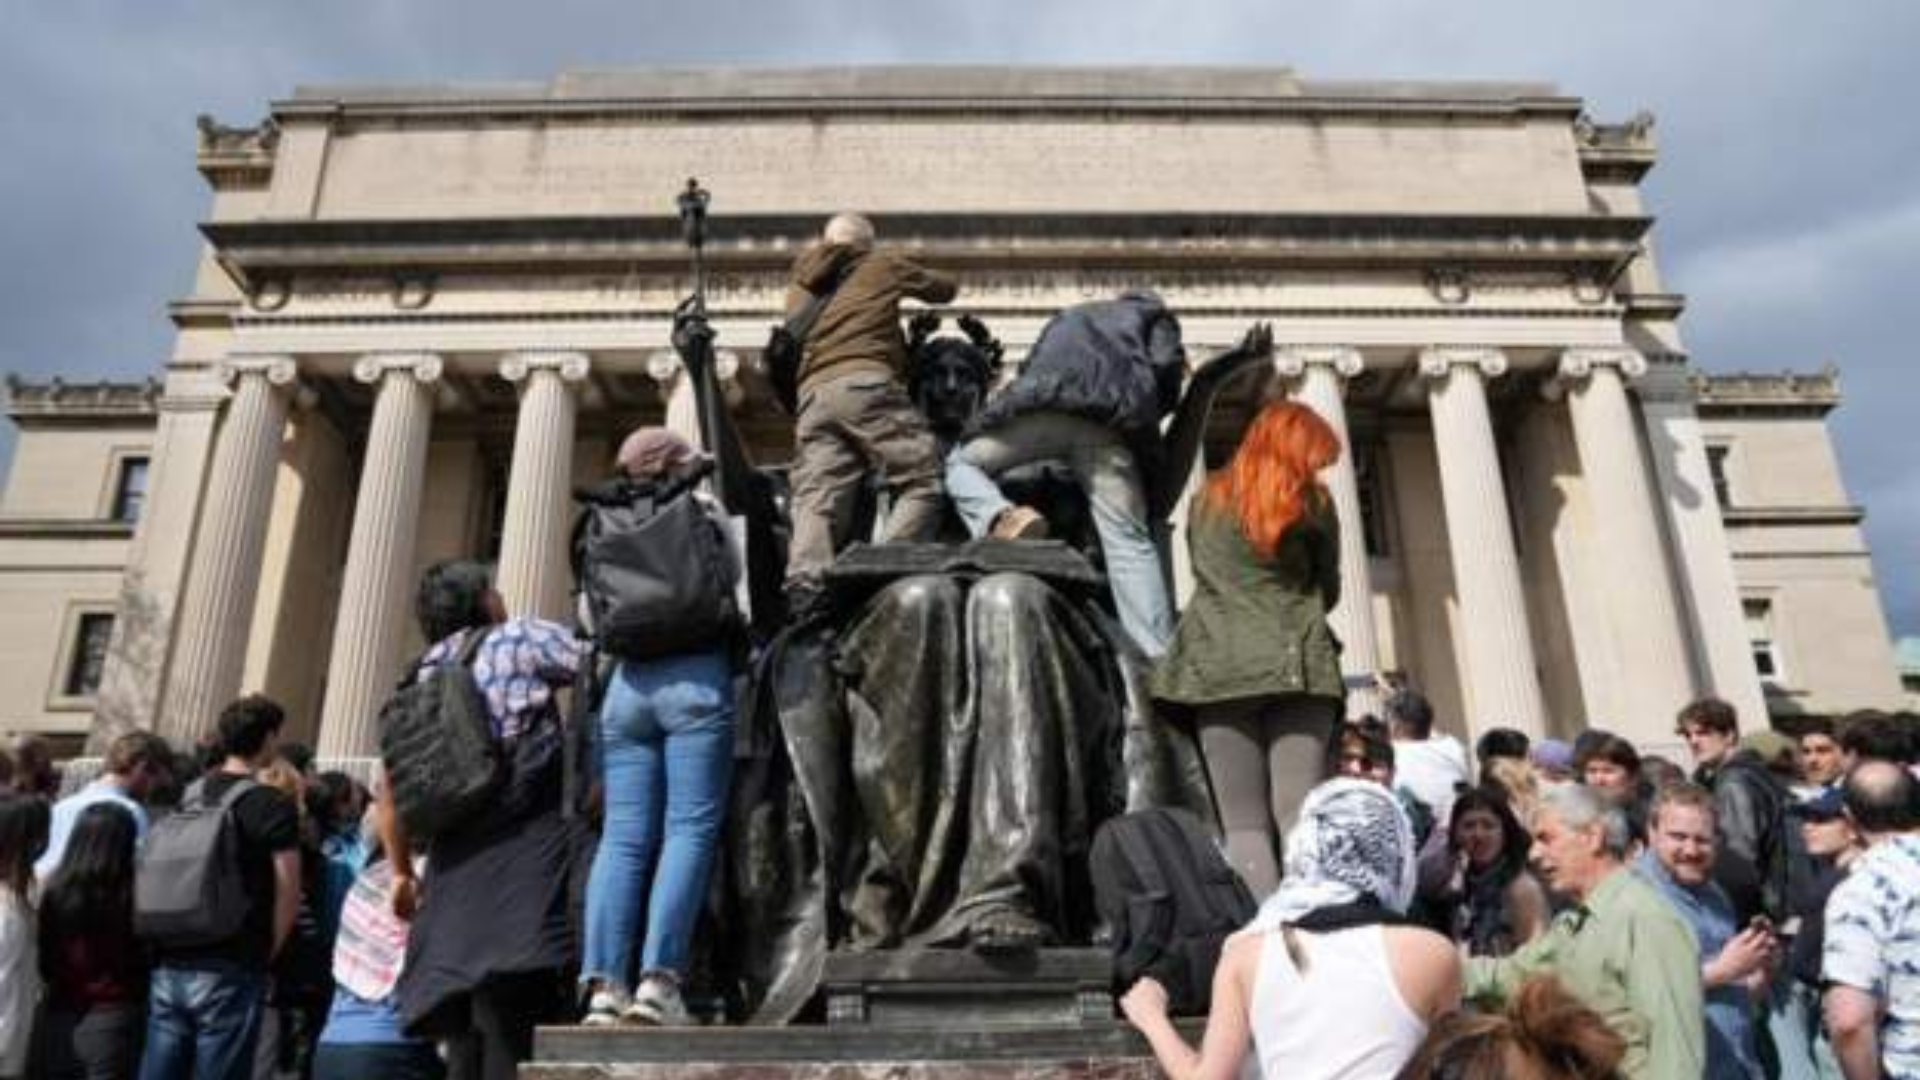 Protesters for Columbia University gather